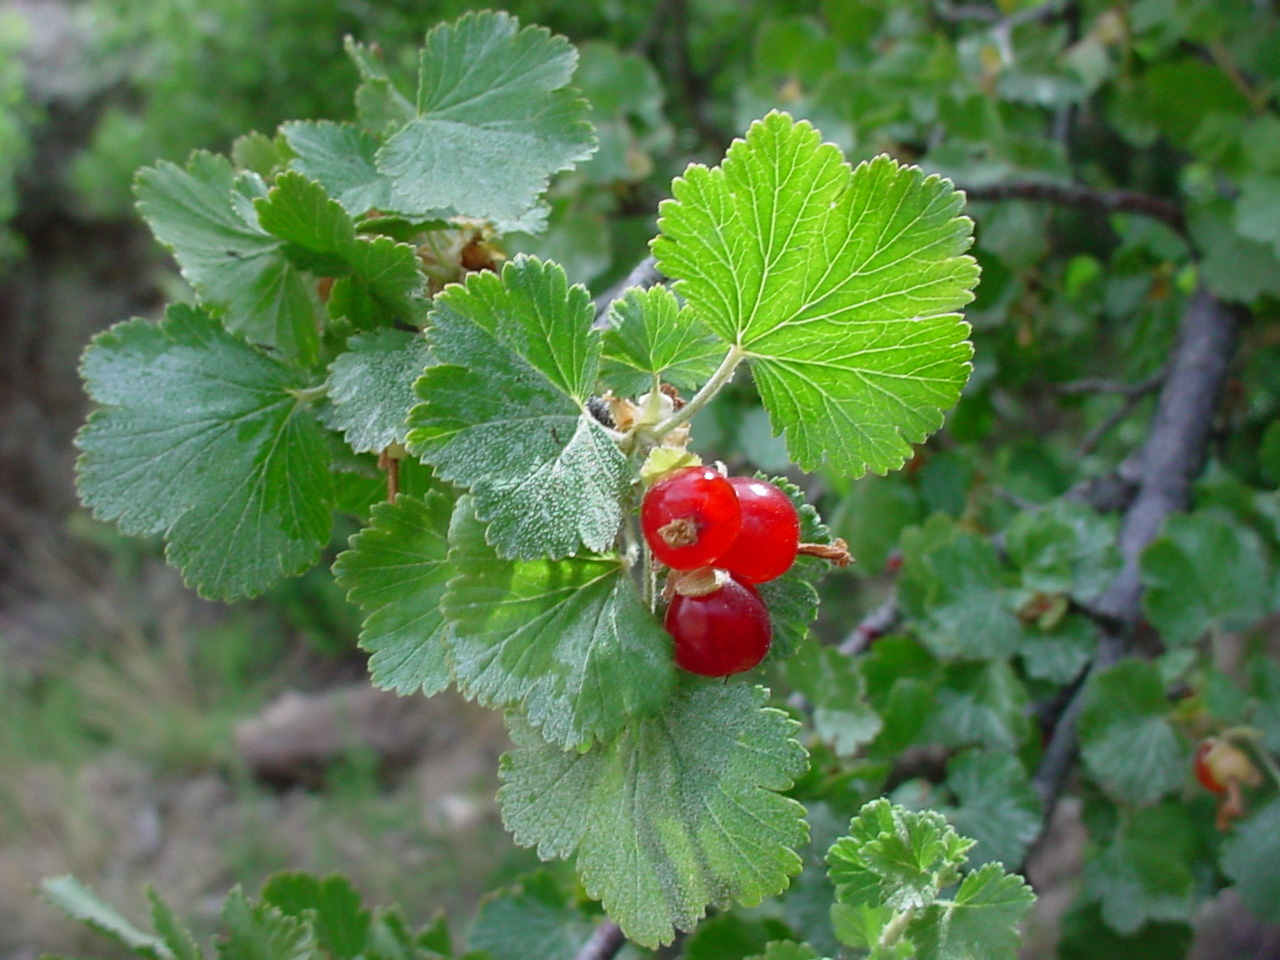 Bright red fruits and foliage